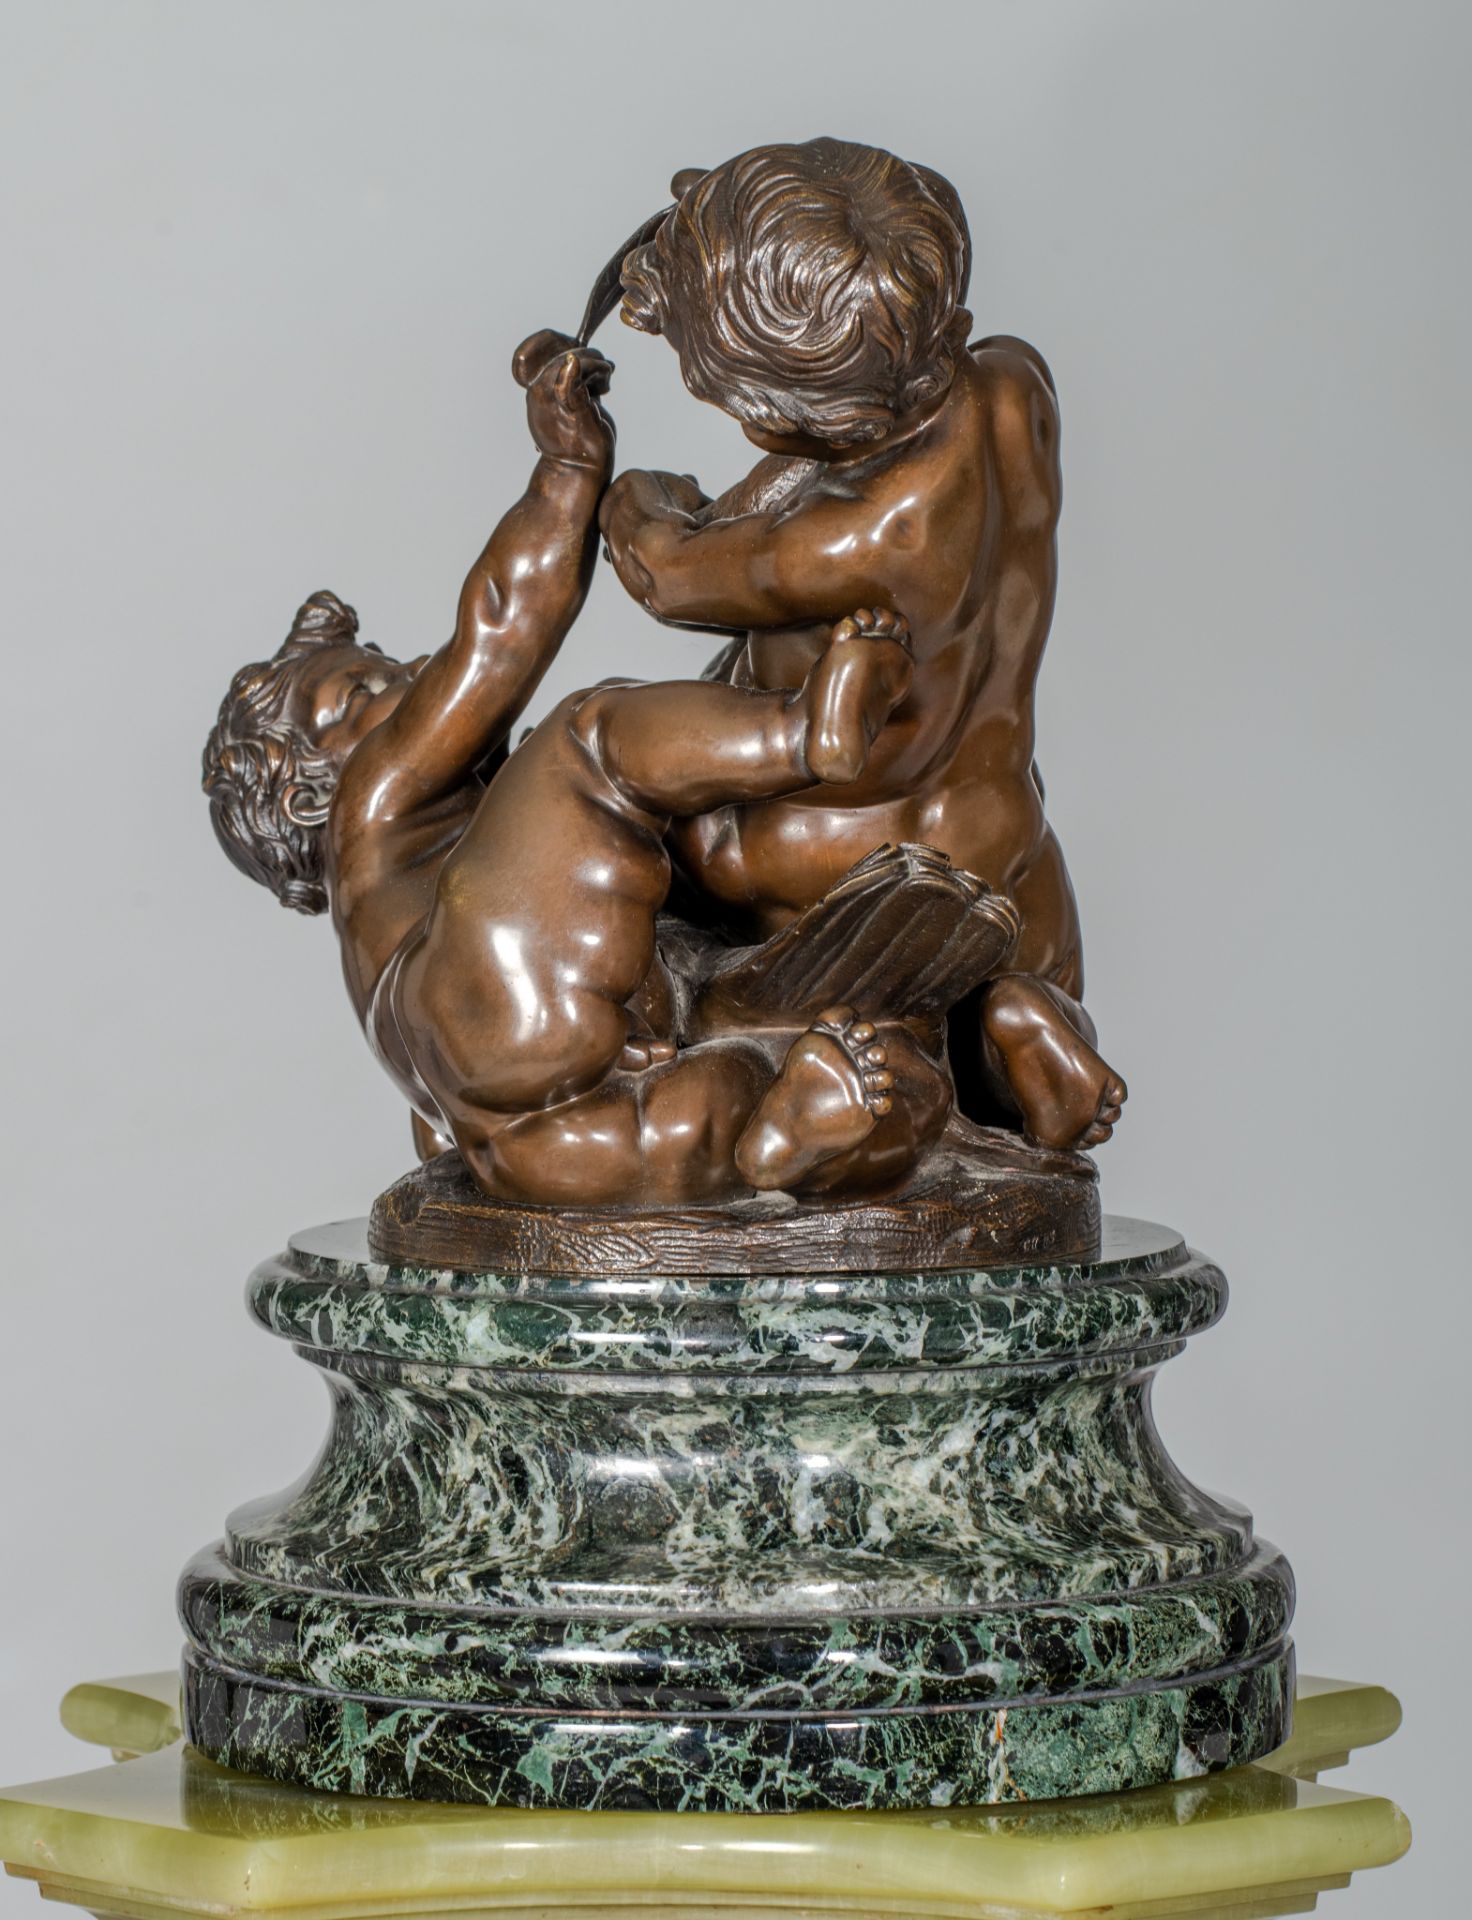 Clodion, putti playing with a swan, patinated bronze on a marble pedestal, H 145 cm (total height) - Image 10 of 18